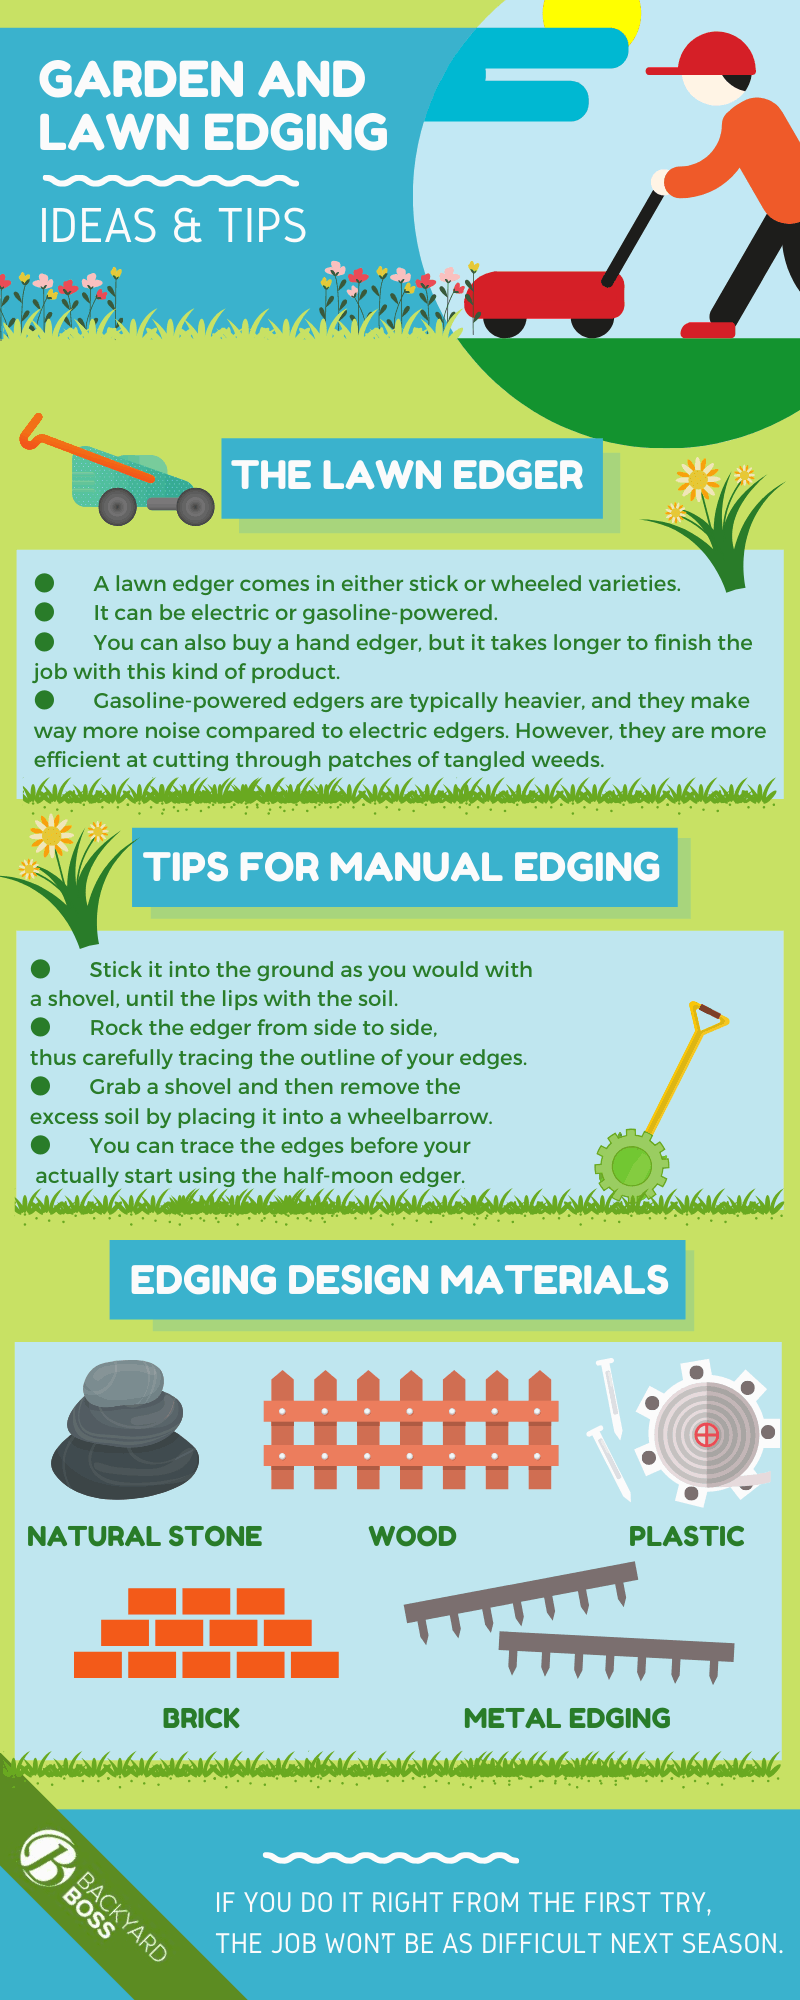 Garden and Lawn Edging Ideas &amp; Tips - infographic